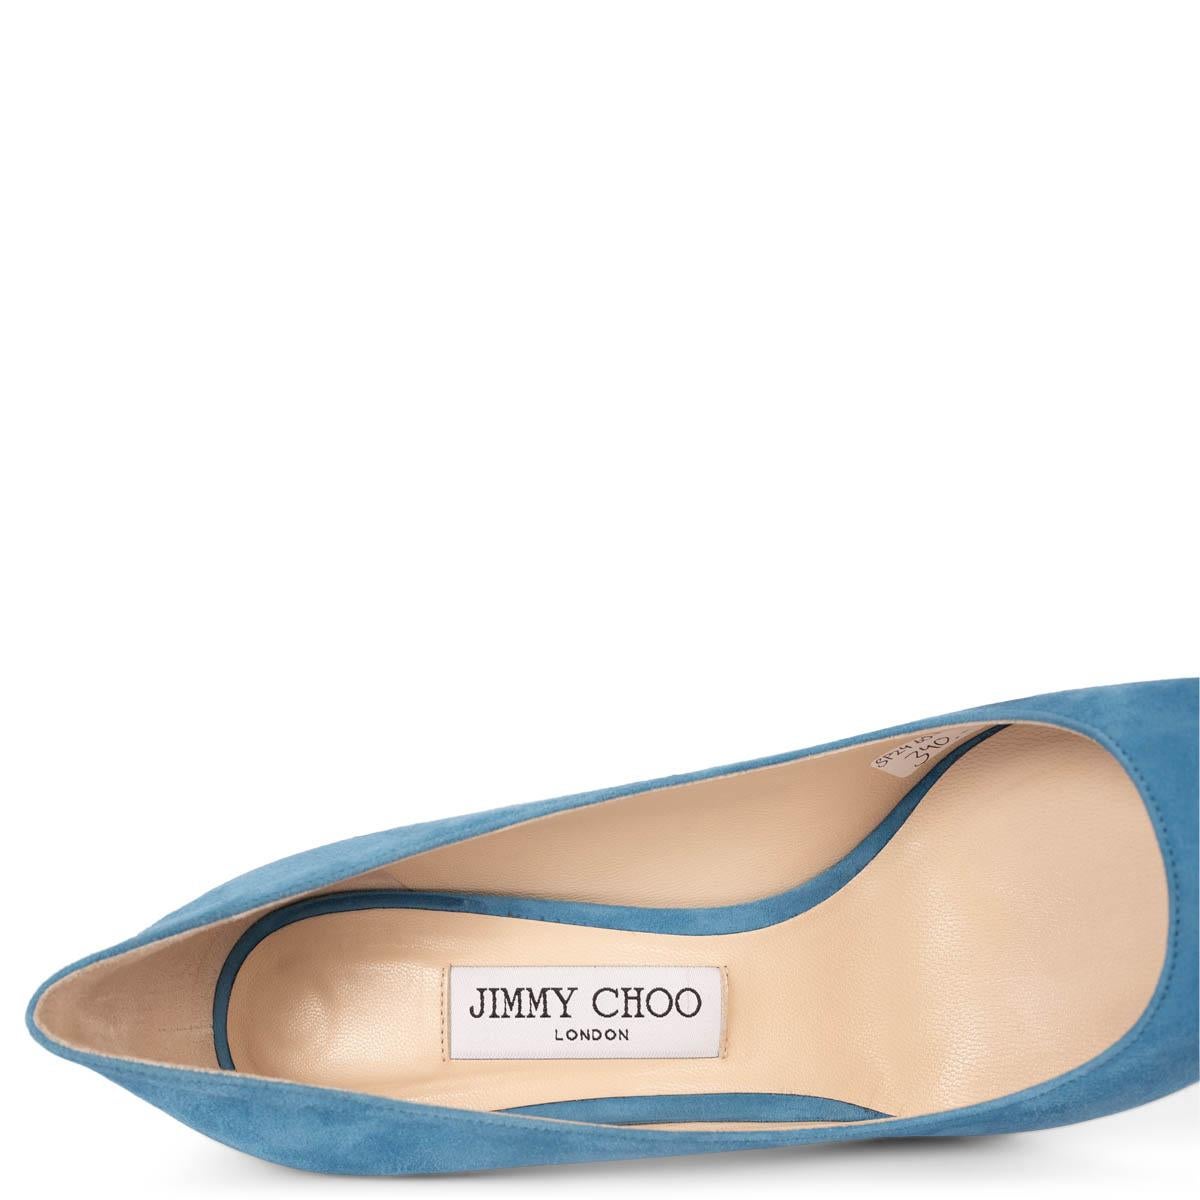 JIMMY CHOO Robot blue suede ROMY 100 Pumps Shoes 38.5 For Sale 5